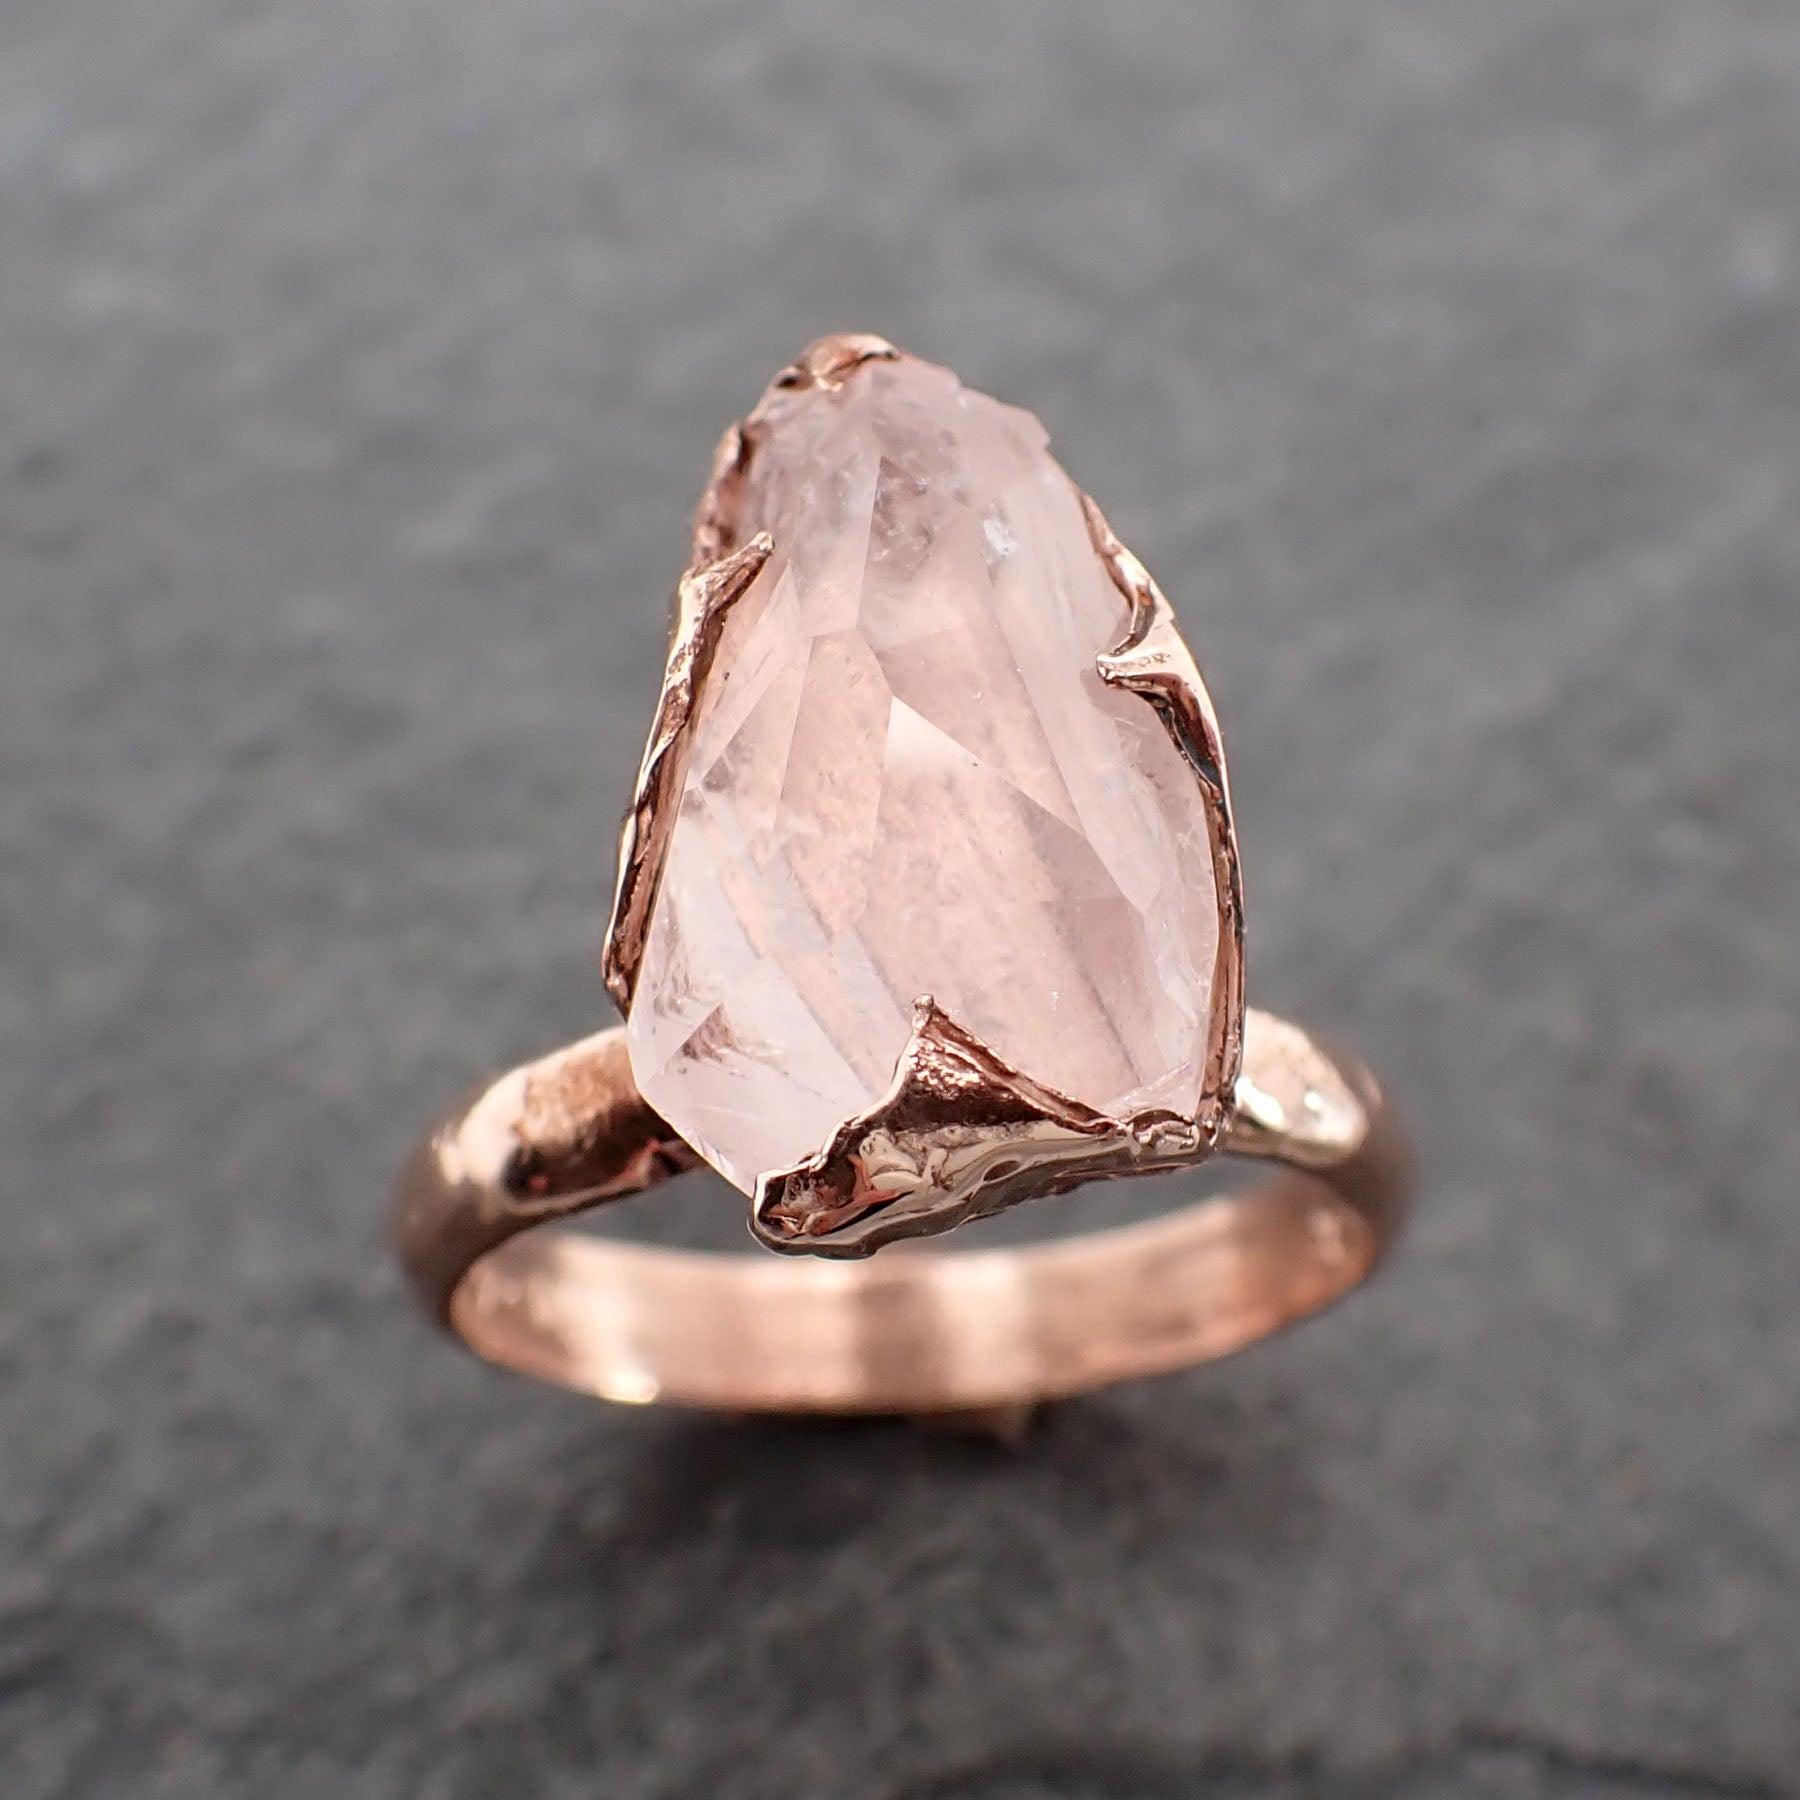 Morganite partially faceted 14k Rose gold solitaire Pink Gemstone Cocktail Ring Statement Ring gemstone Jewelry by Angeline 2498